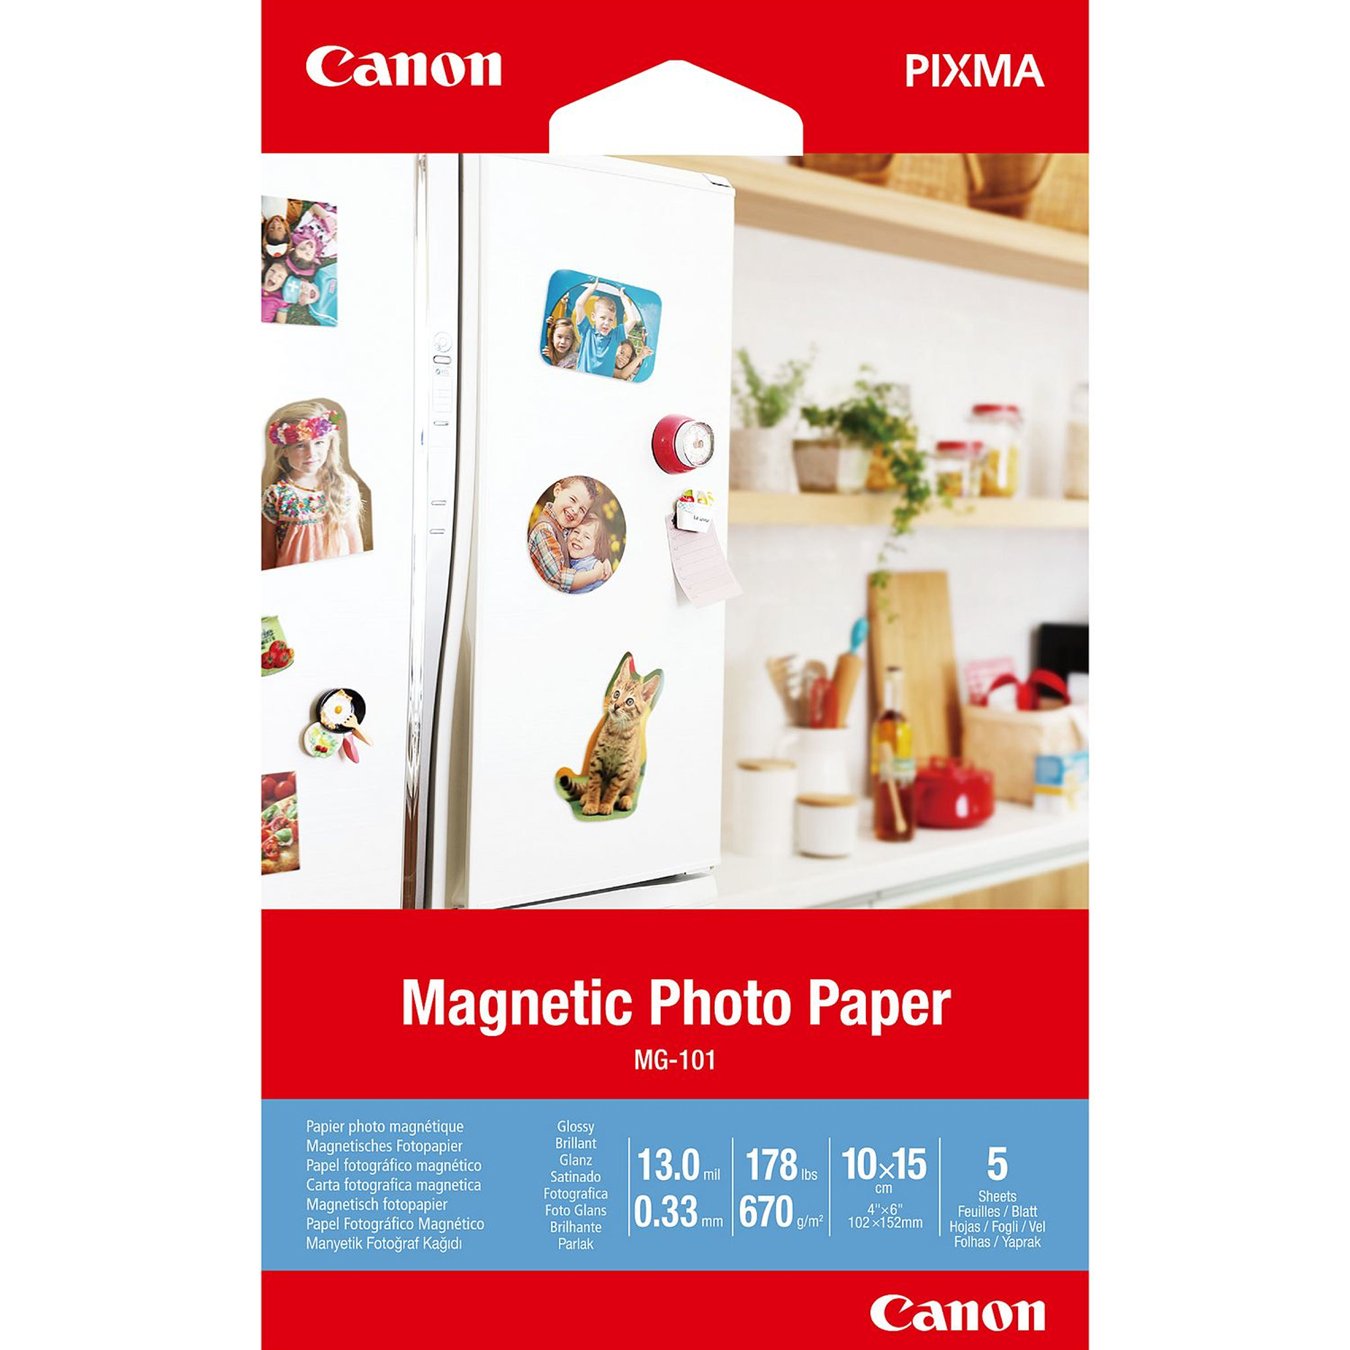 Canon MG-101 6x4 Inch Magnetic Photo Paper Review